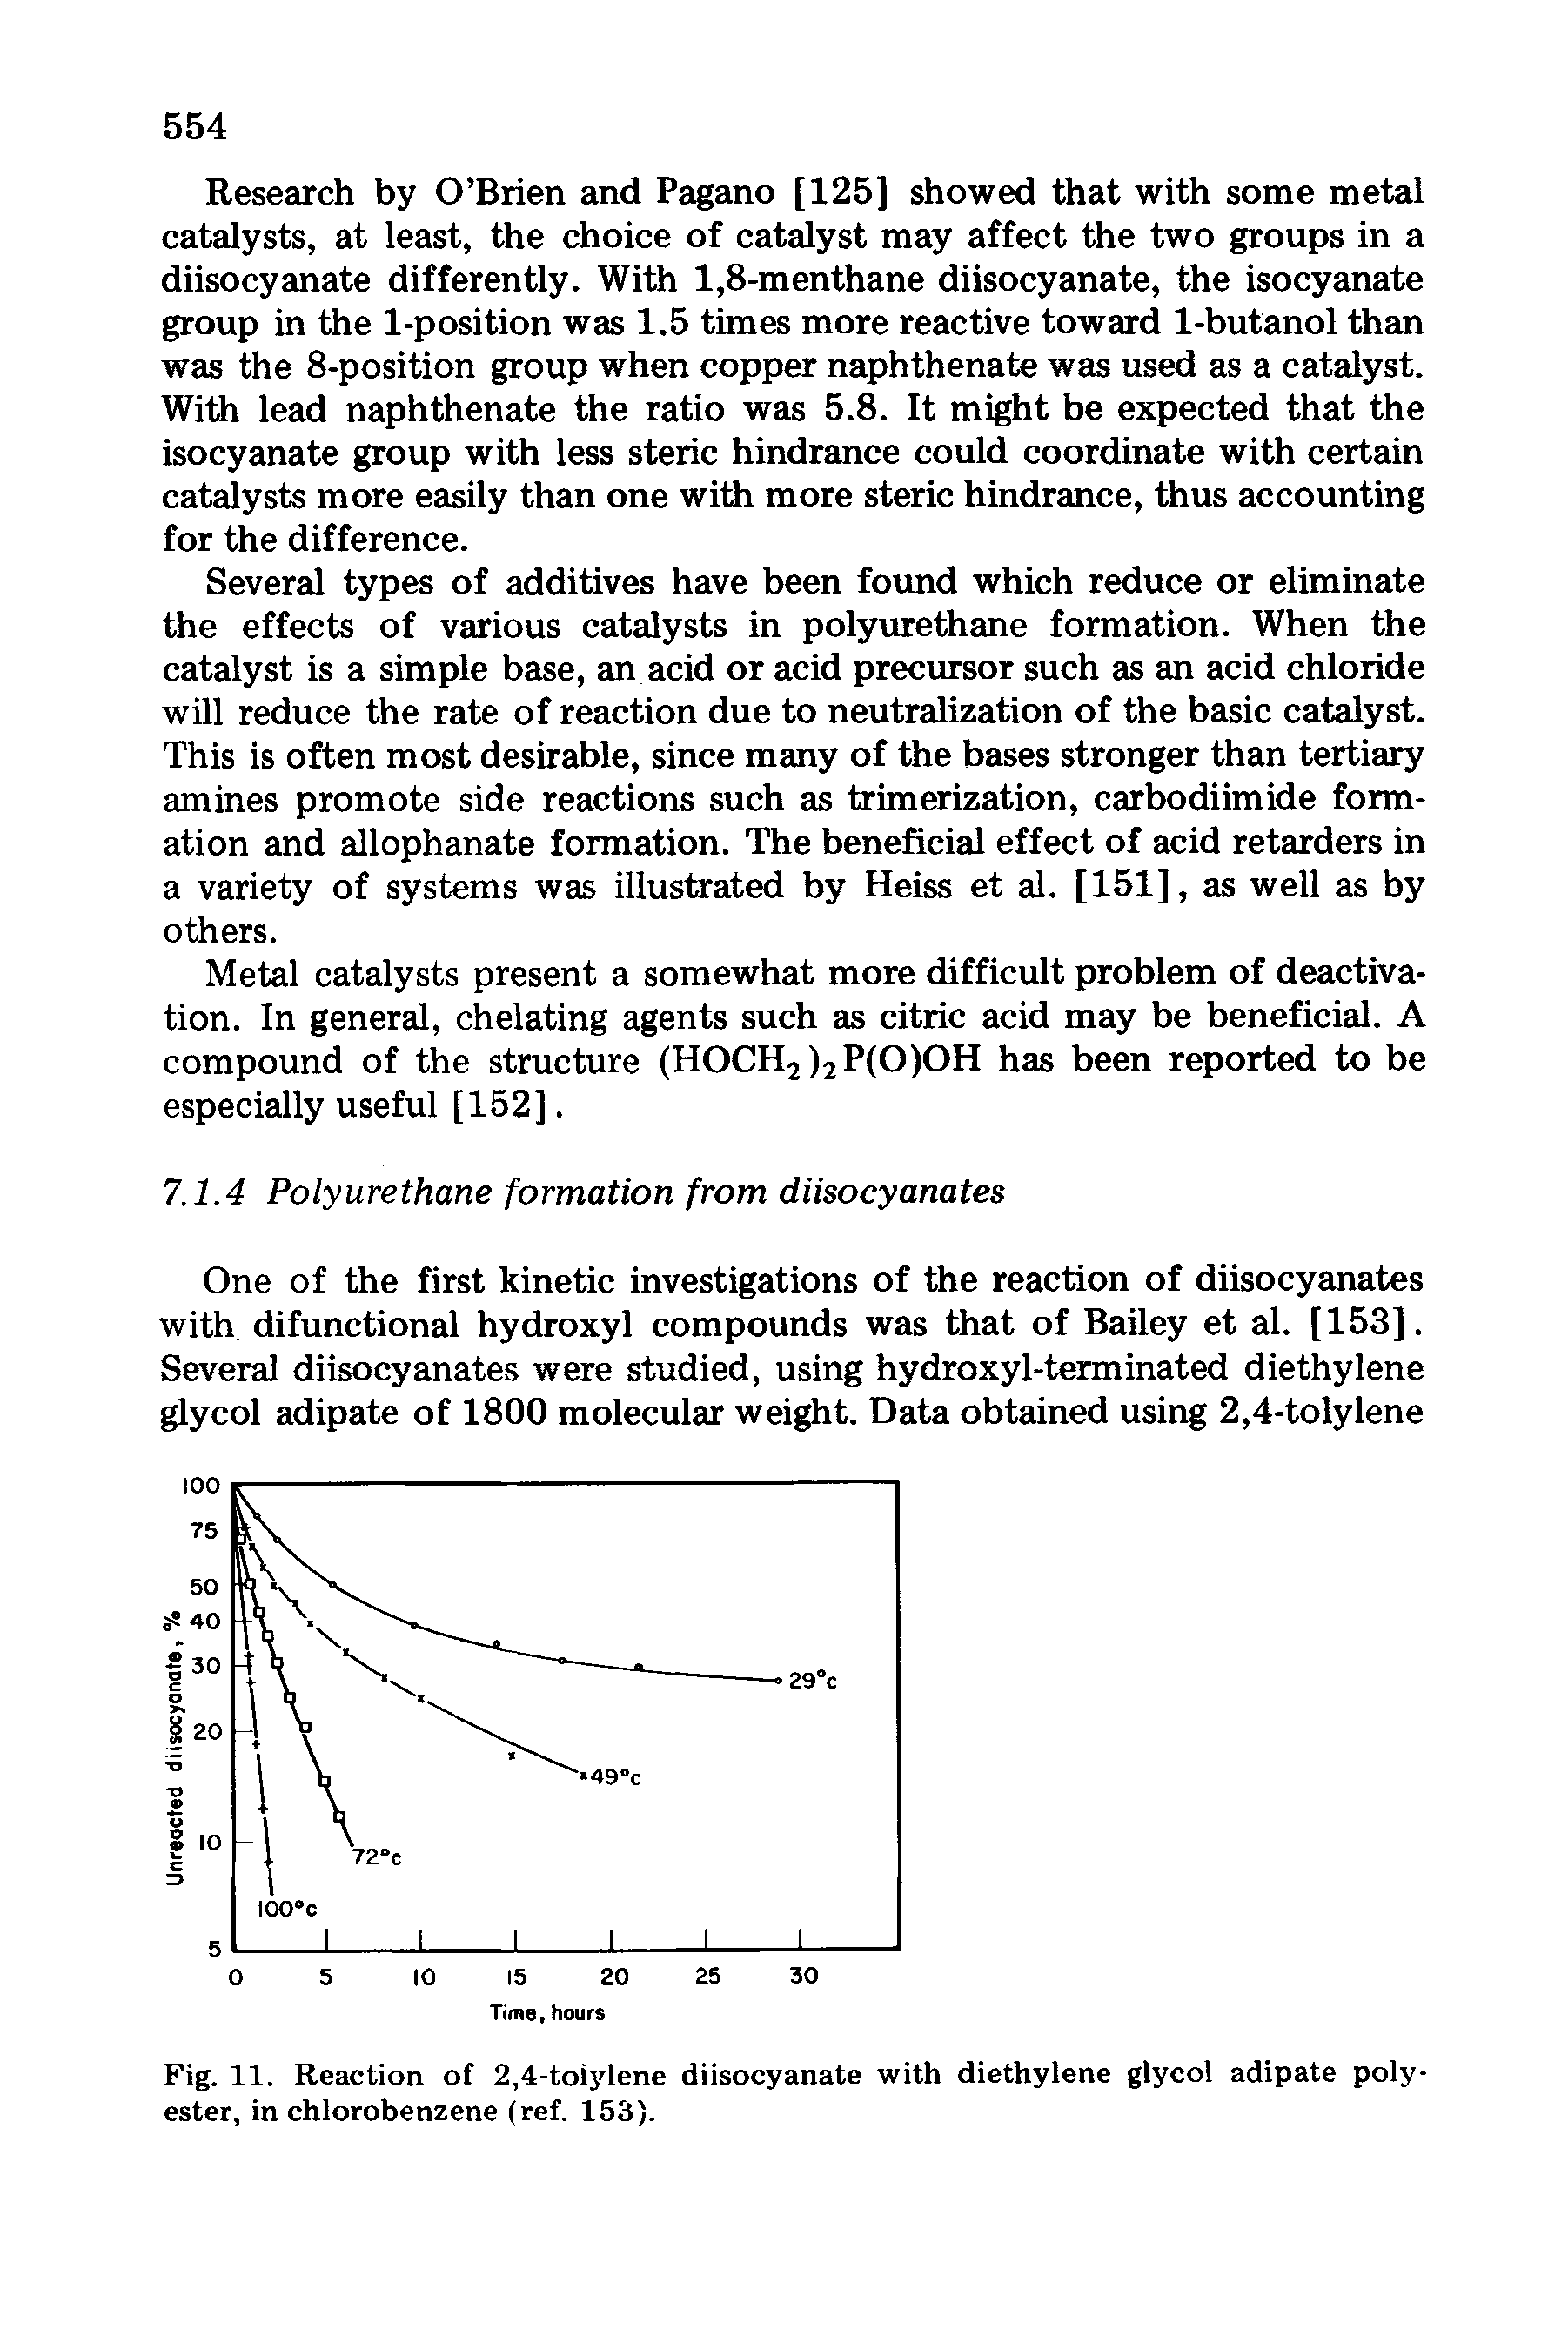 Fig. 11. Reaction of 2,4-toiylene diisocyanate with diethylene glycol adipate polyester, in chlorobenzene (ref. 153).